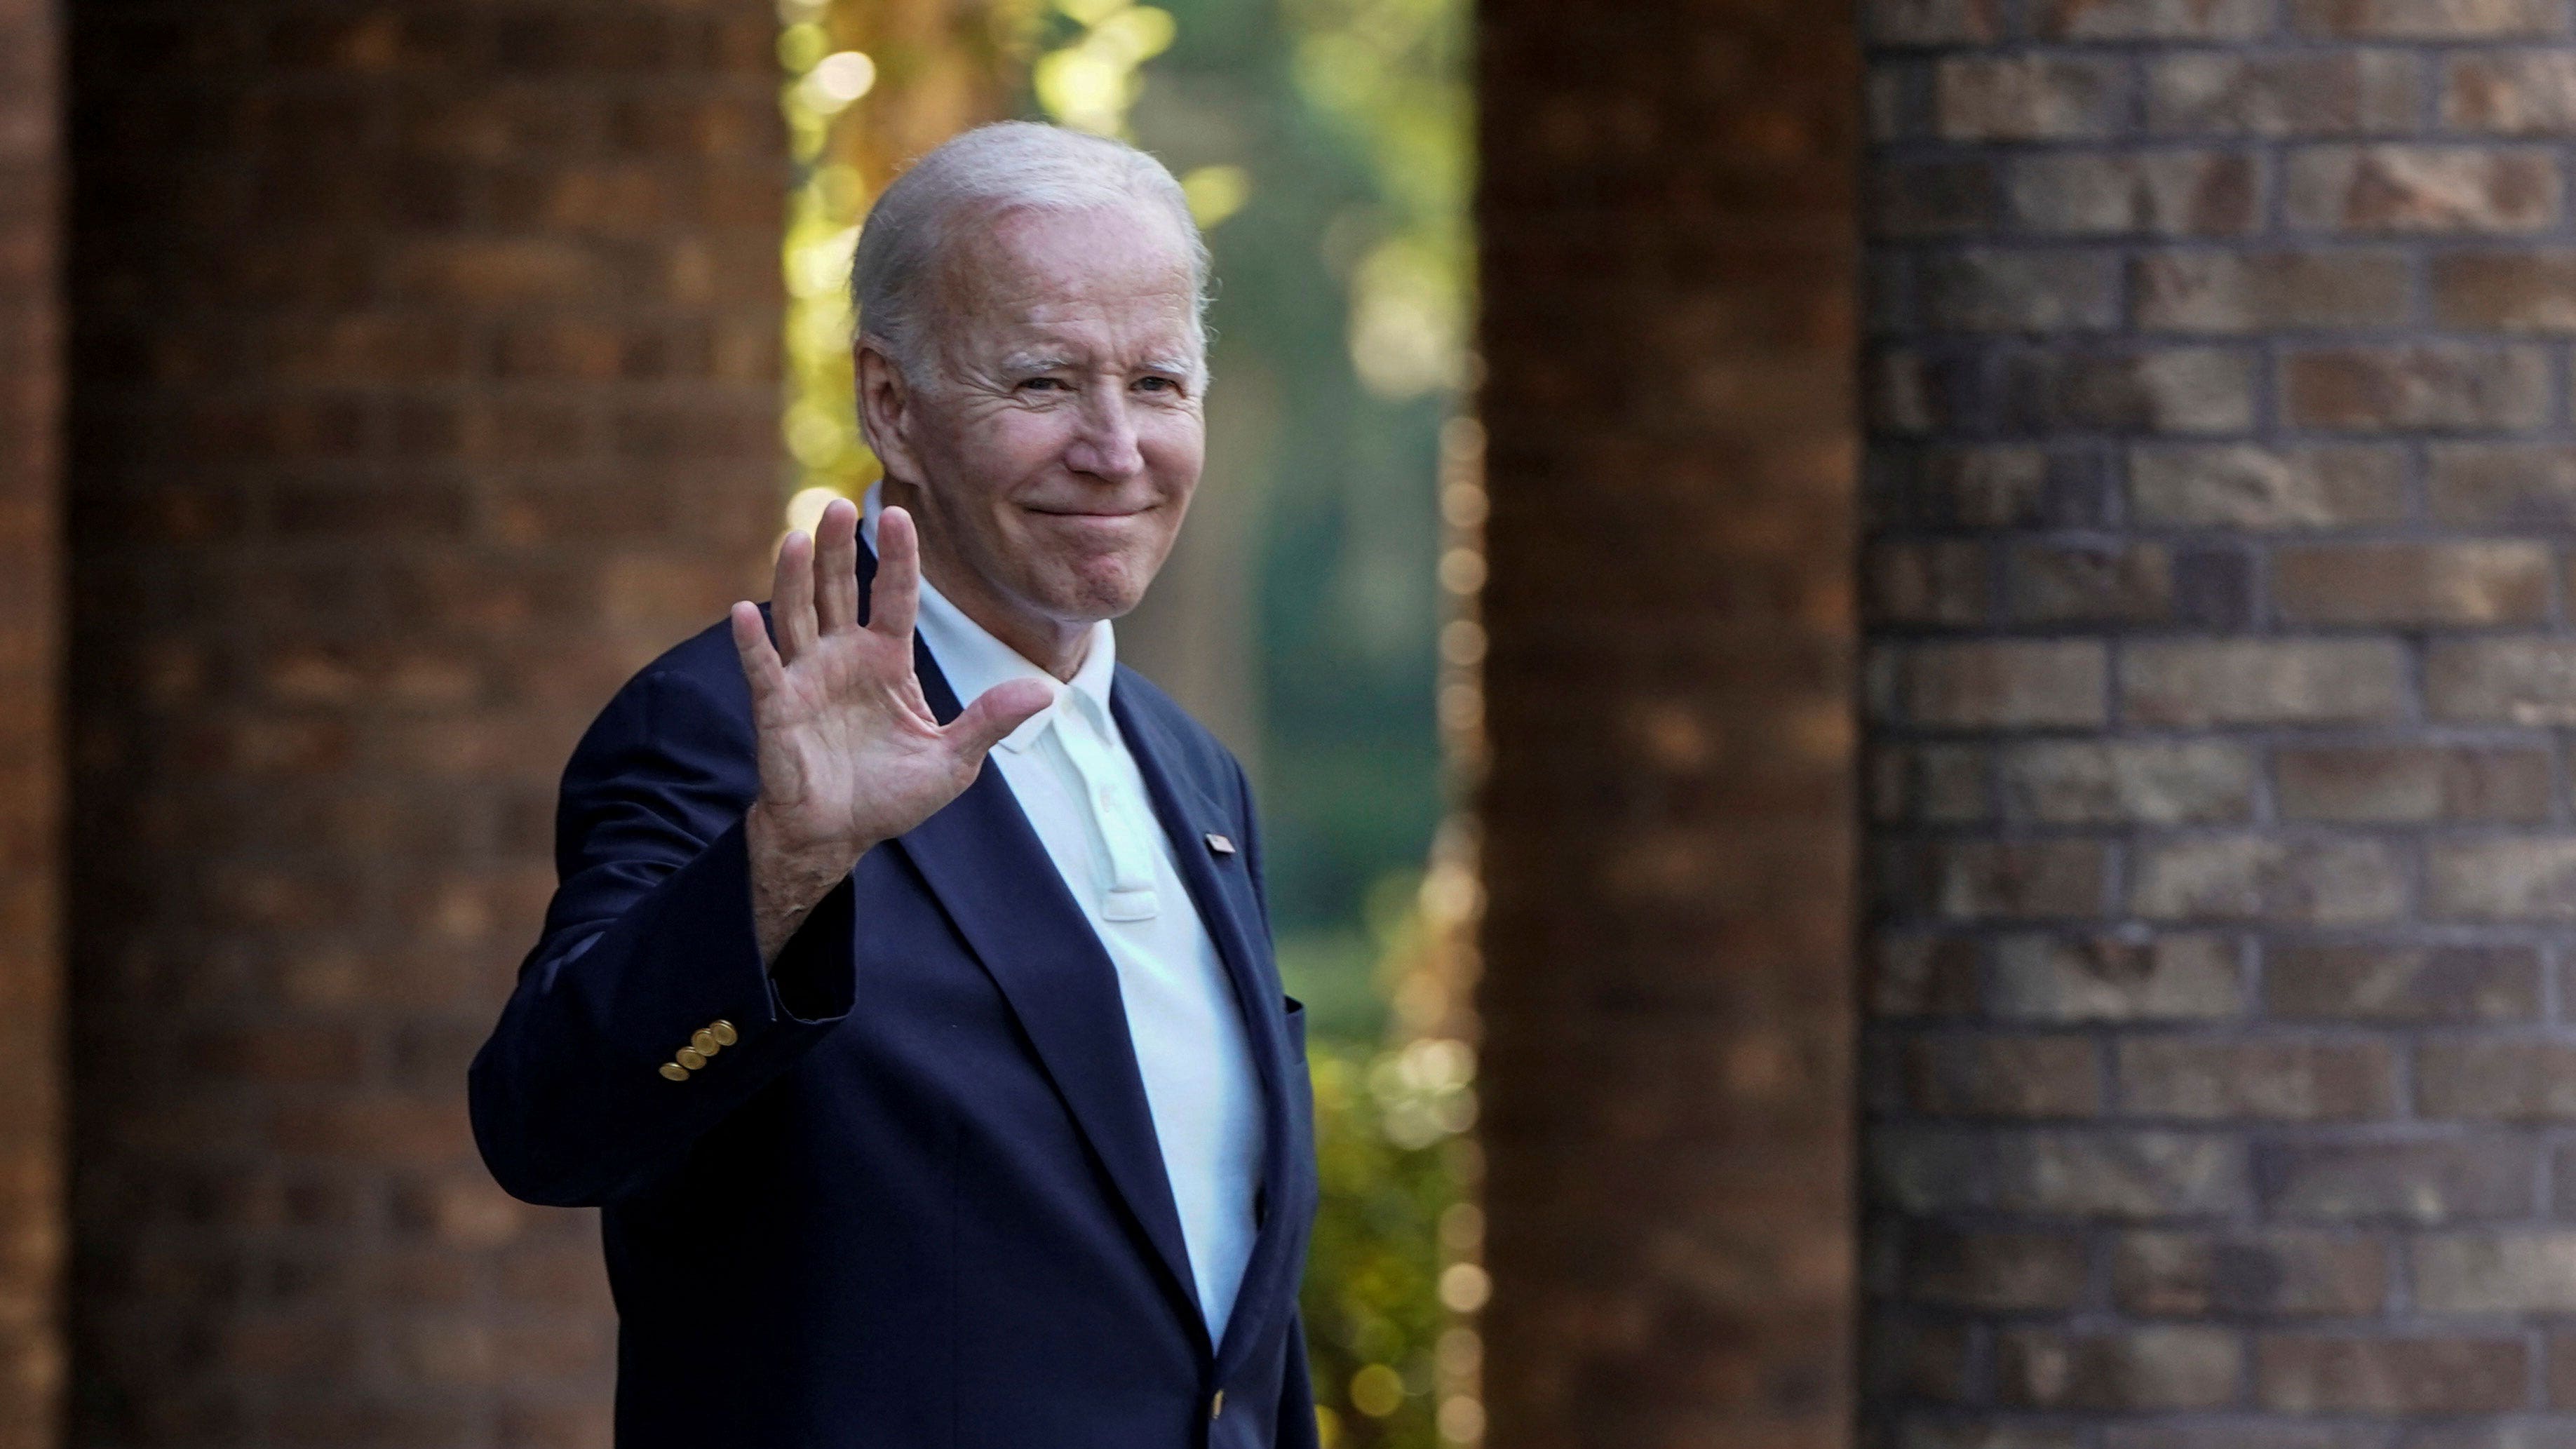 Biden tanked Jimmy Carter’s nominee for CIA over mishandled classified docs